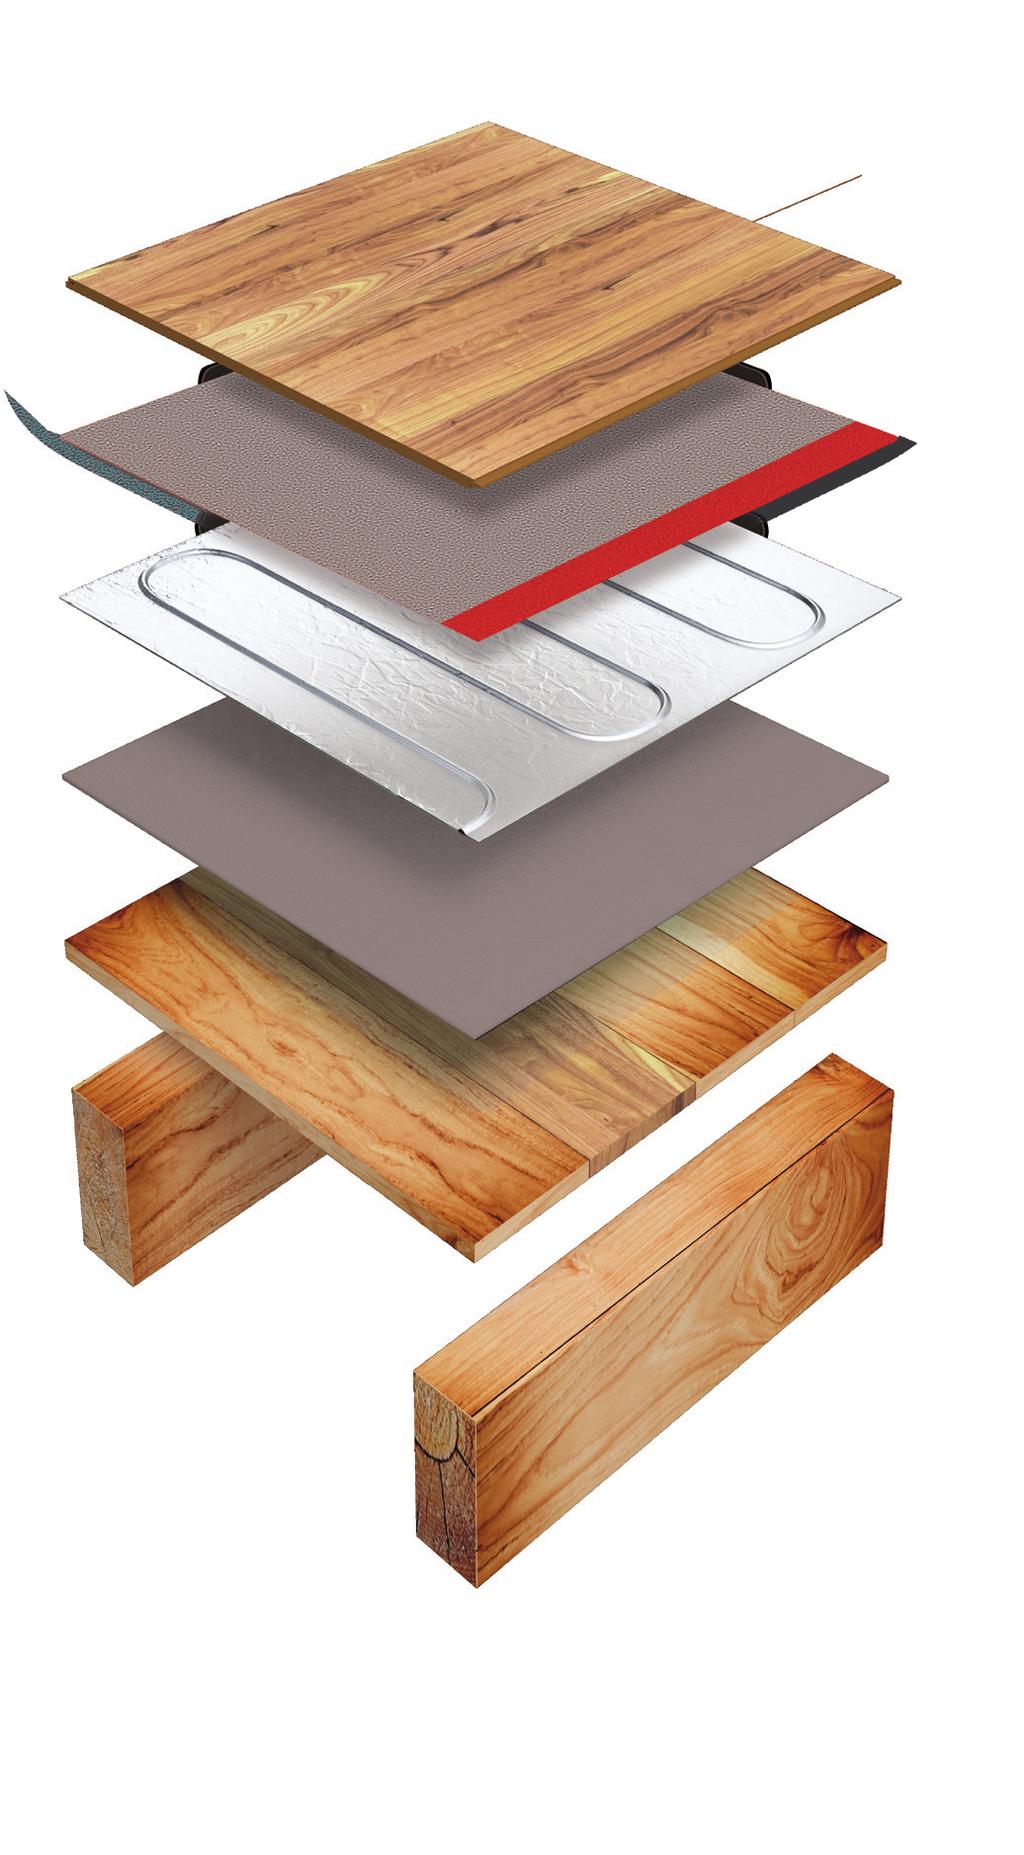 Our recommended solution Engineered timber and